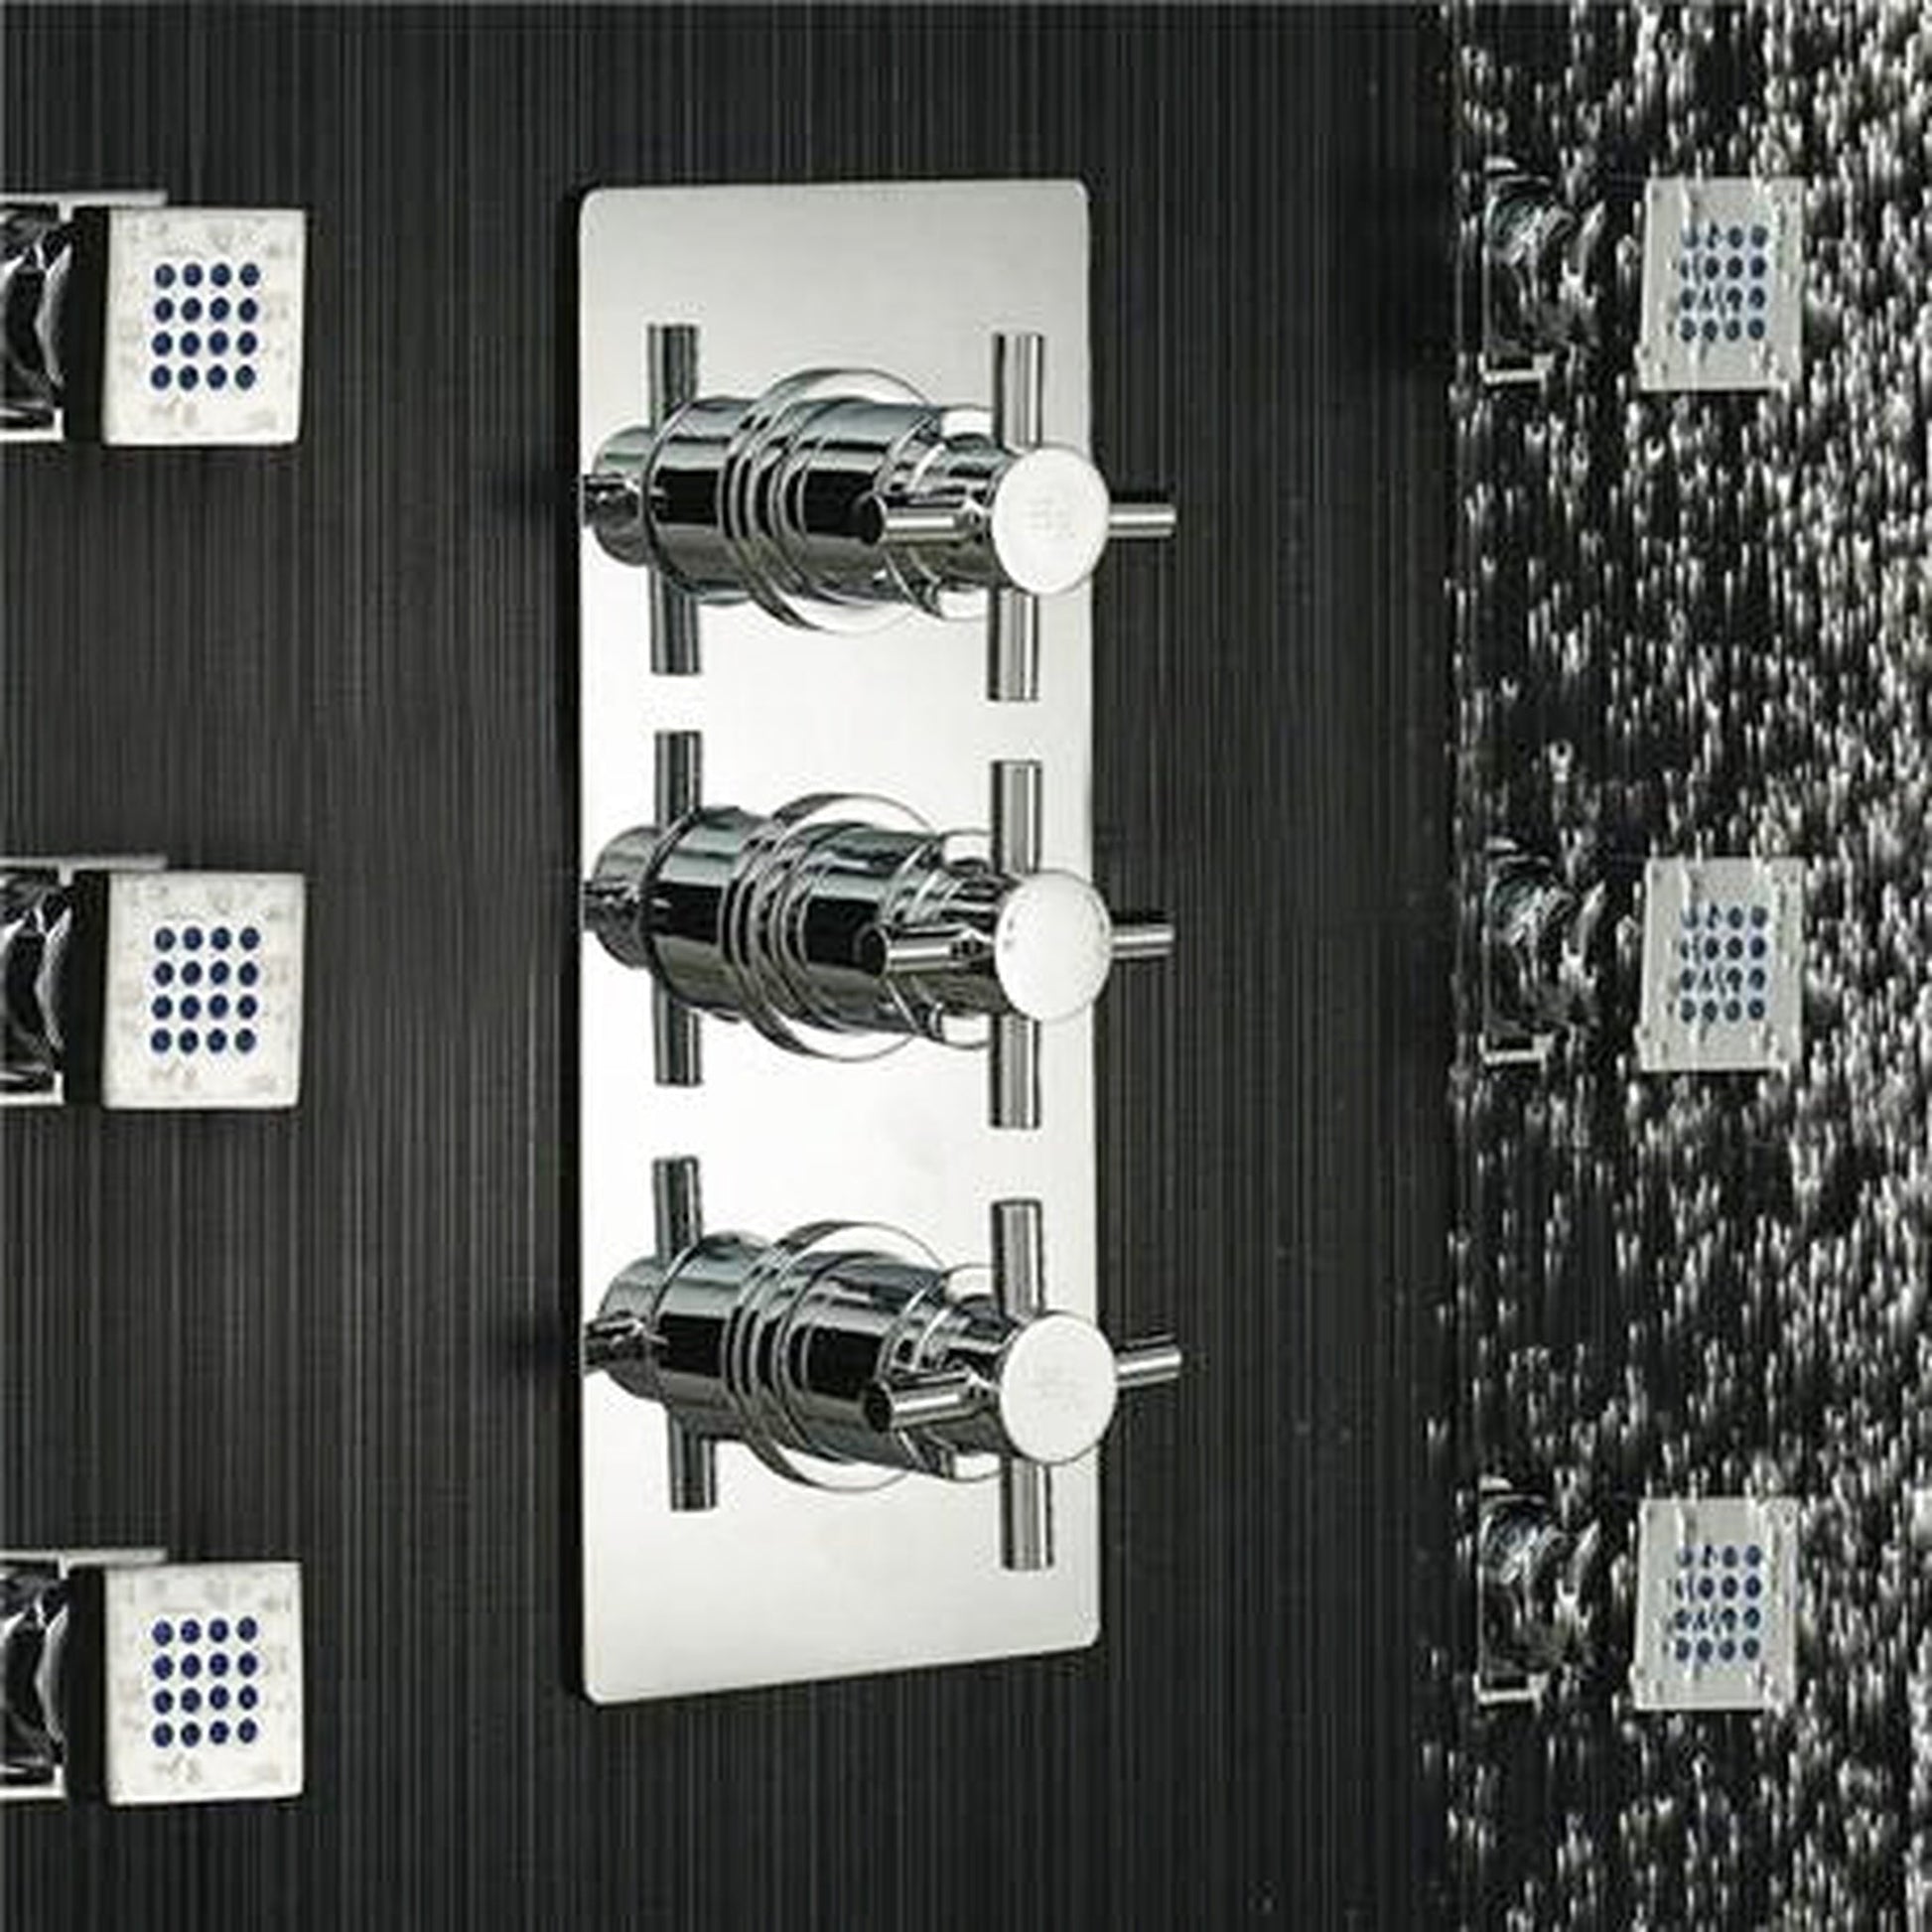 Fontana Reno 12" Chrome Round Ceiling Mounted Rainfall Shower System With 6-Body Massage Jets and Hand Shower